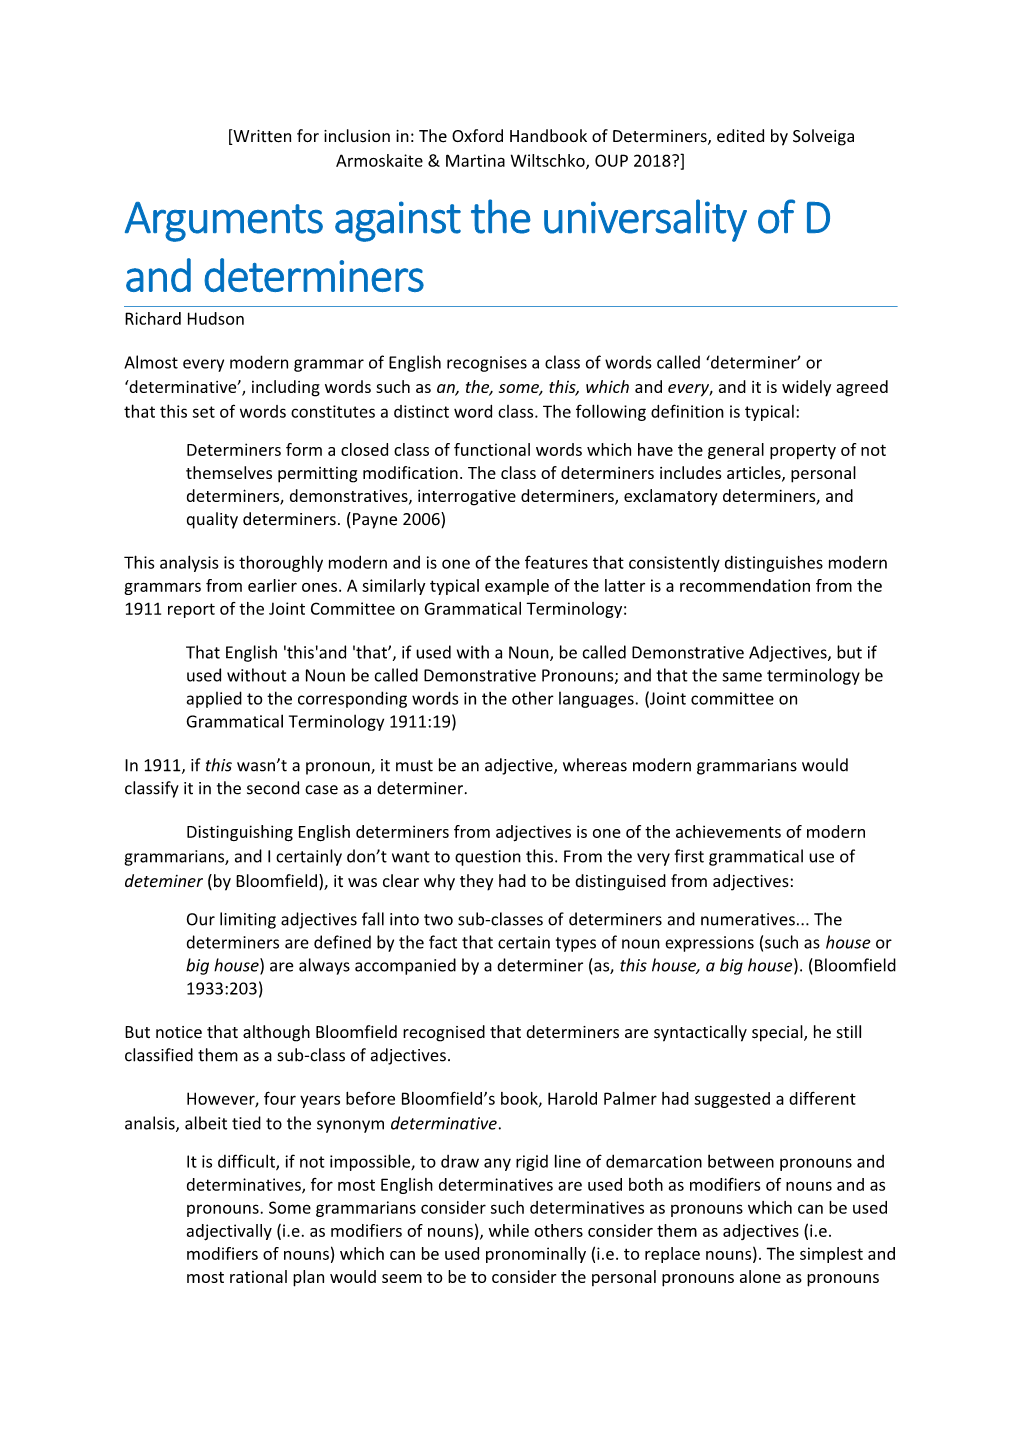 Written for Inclusion In: Theoxford Handbook Ofdeterminers, Edited By